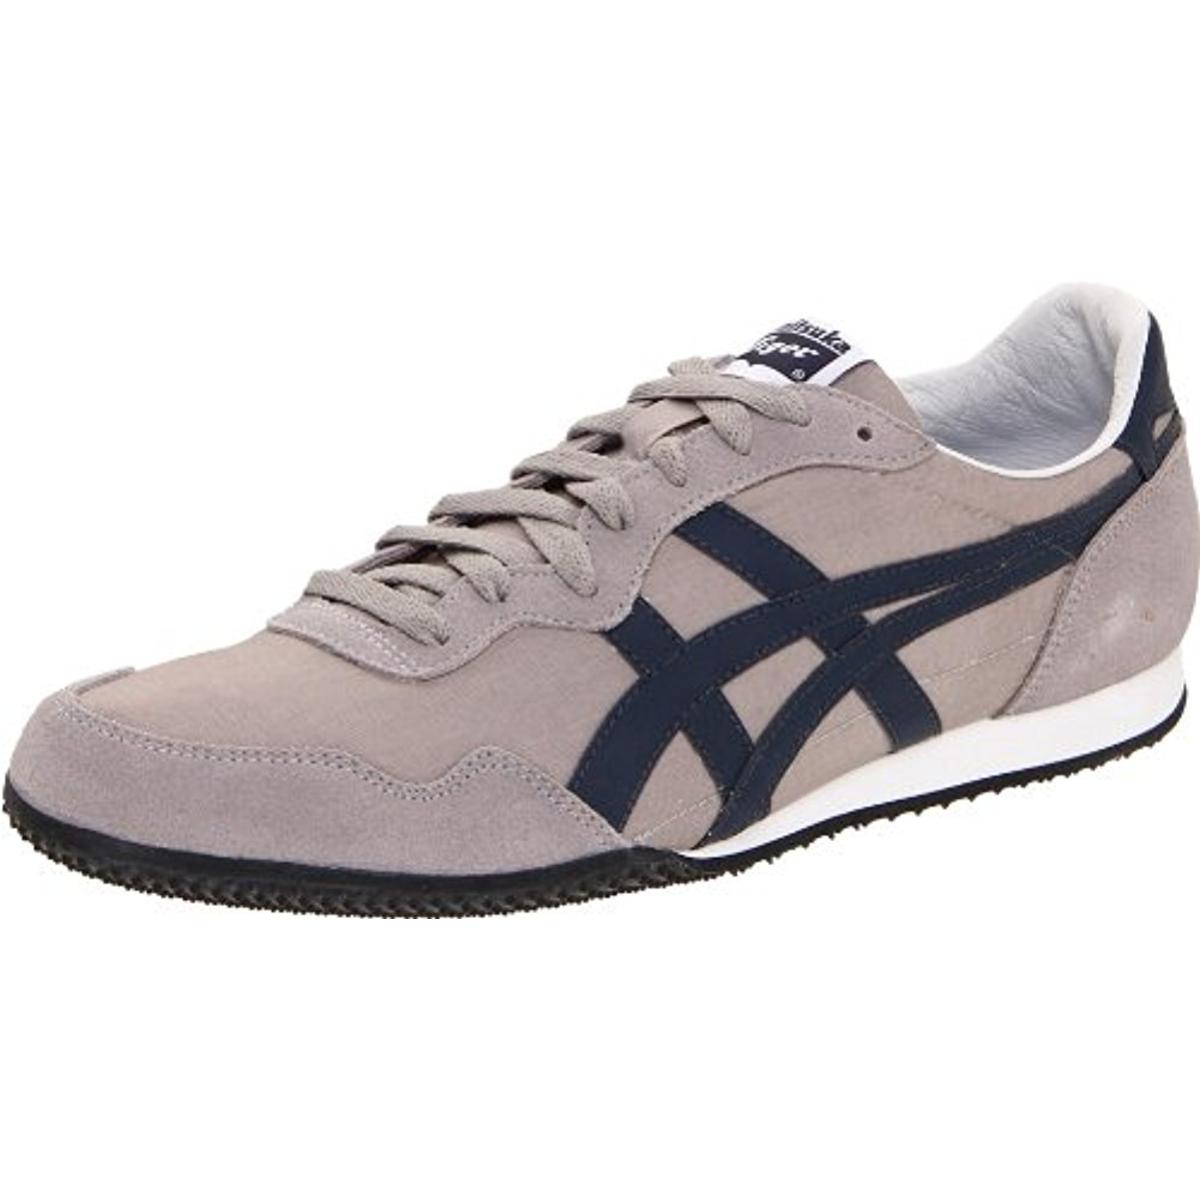 Onitsuka Tiger 0757 Womens Serrano Suede Trim Athletic Shoes Sneakers ...